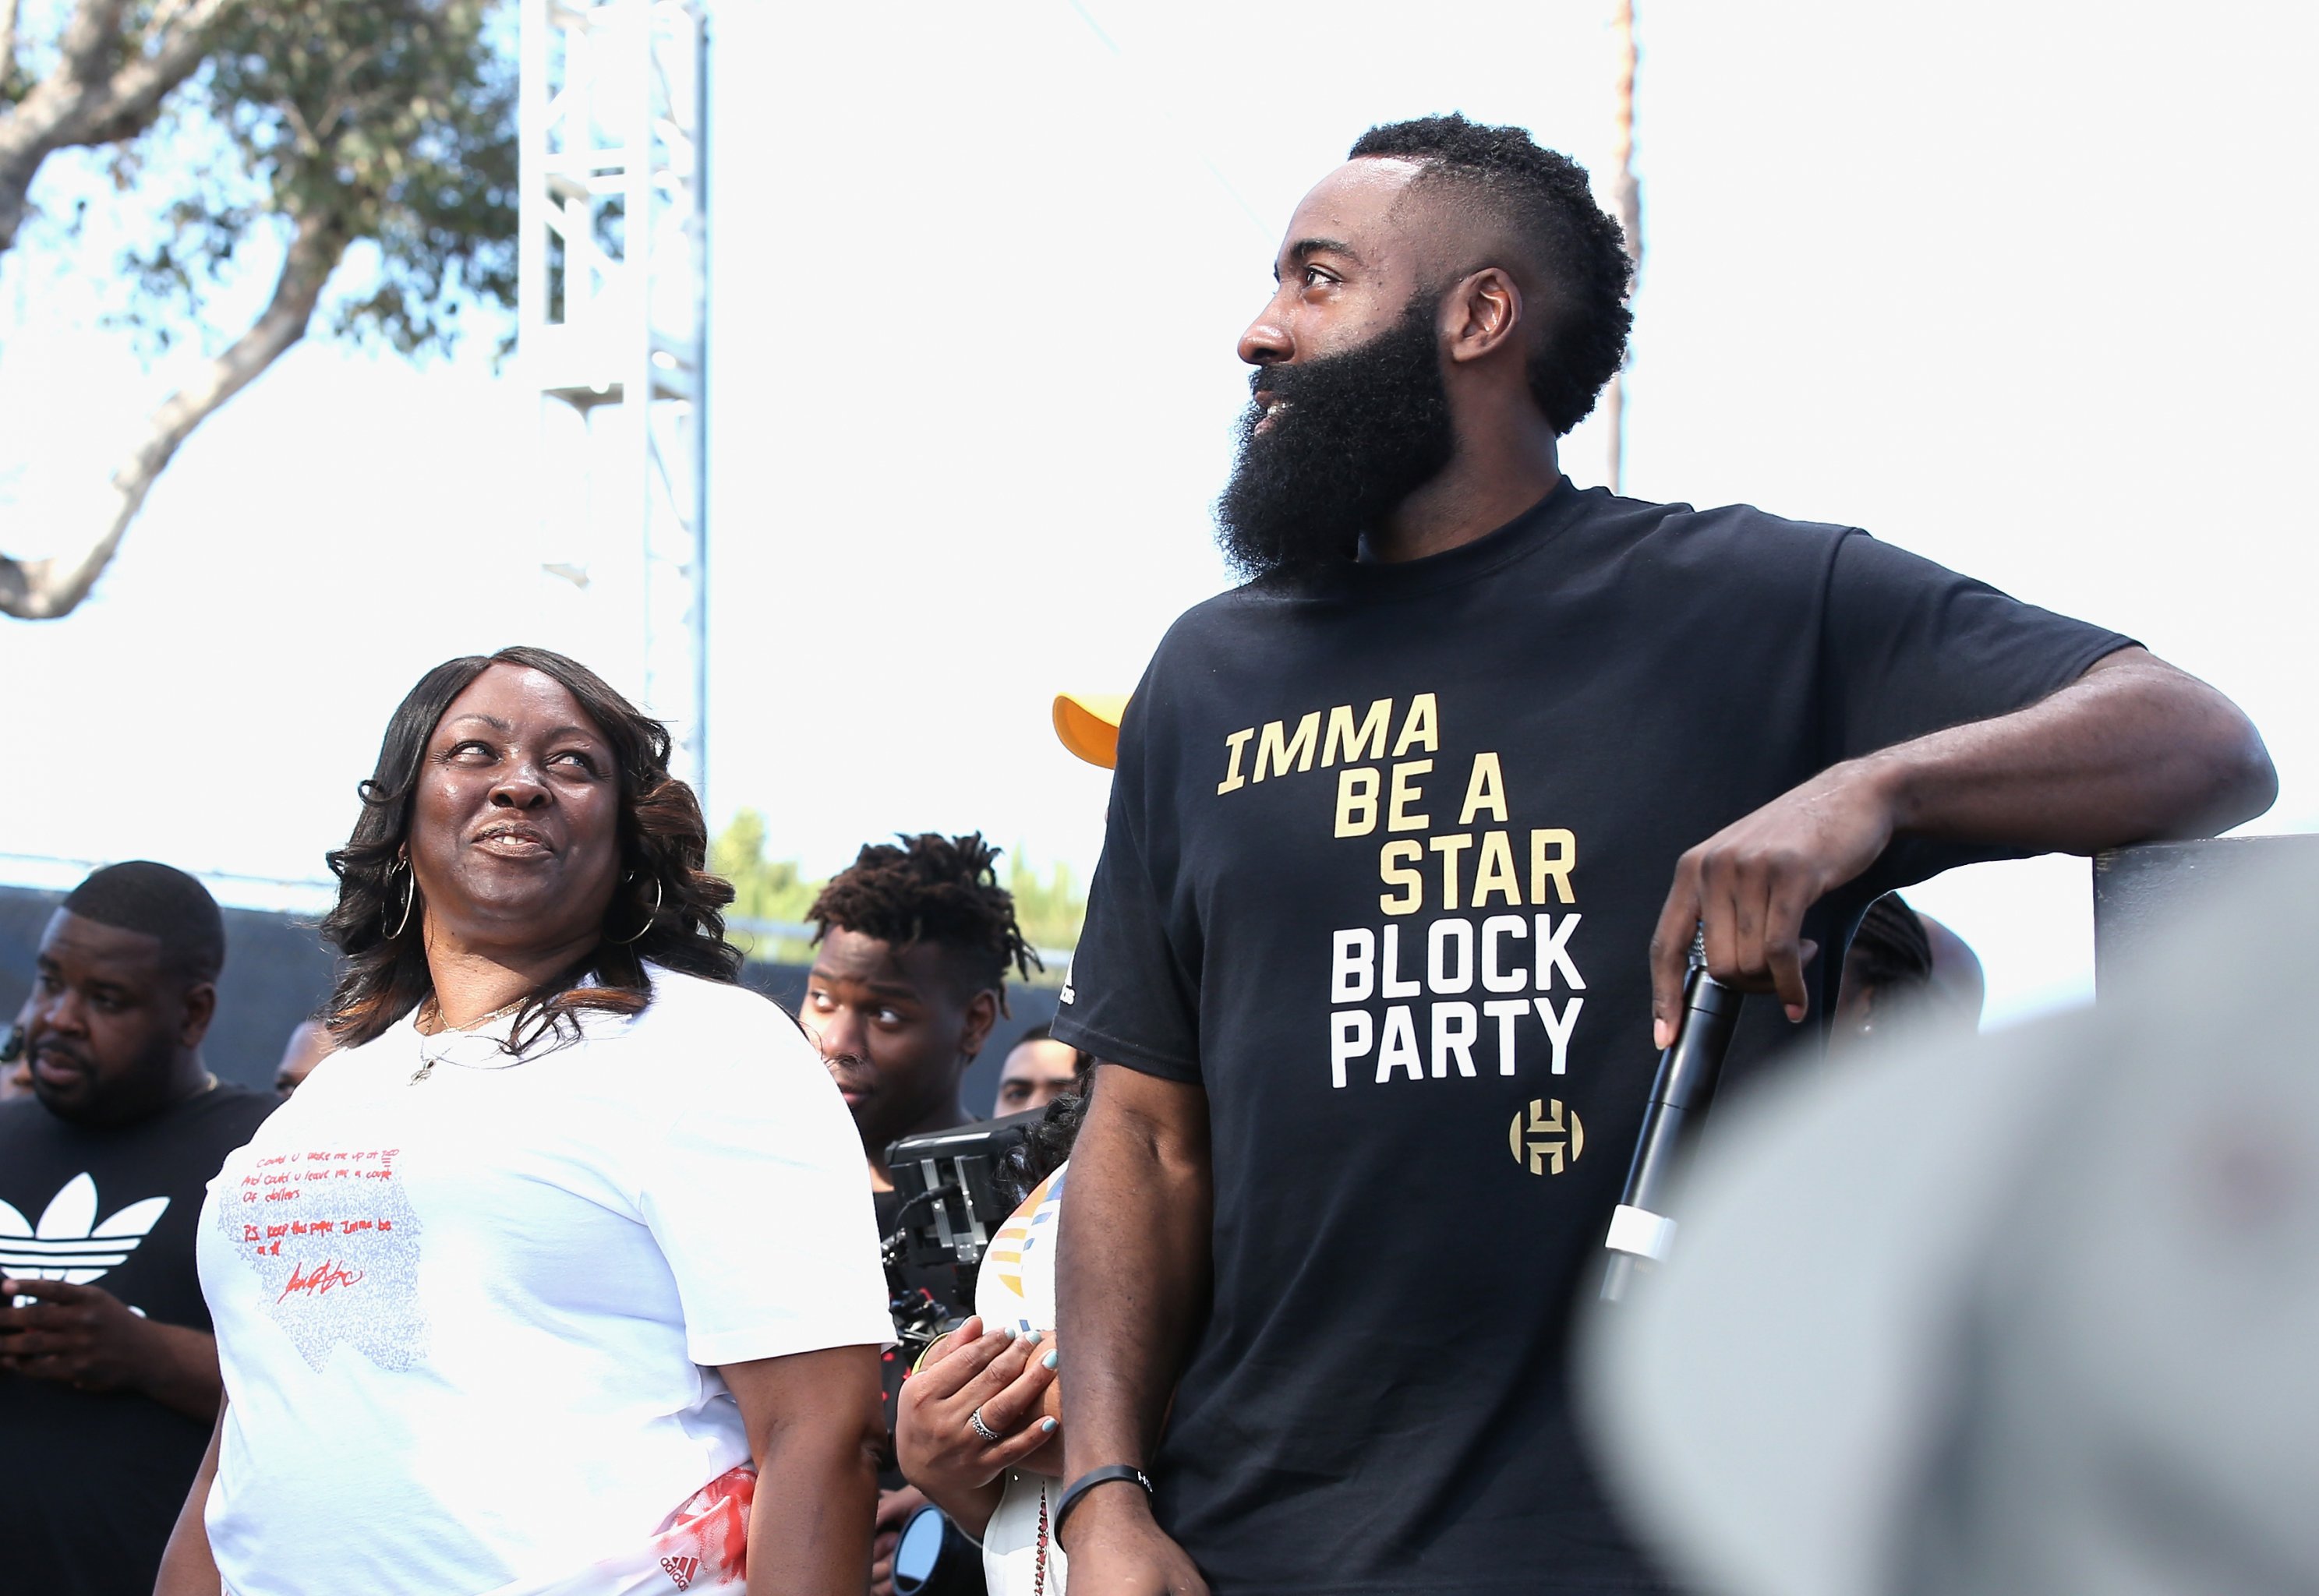 James Harden S Mom Doesn T Have Time For Nba Trolls Money Hungry Hangers On Bleacher Report Latest News Videos And Highlights